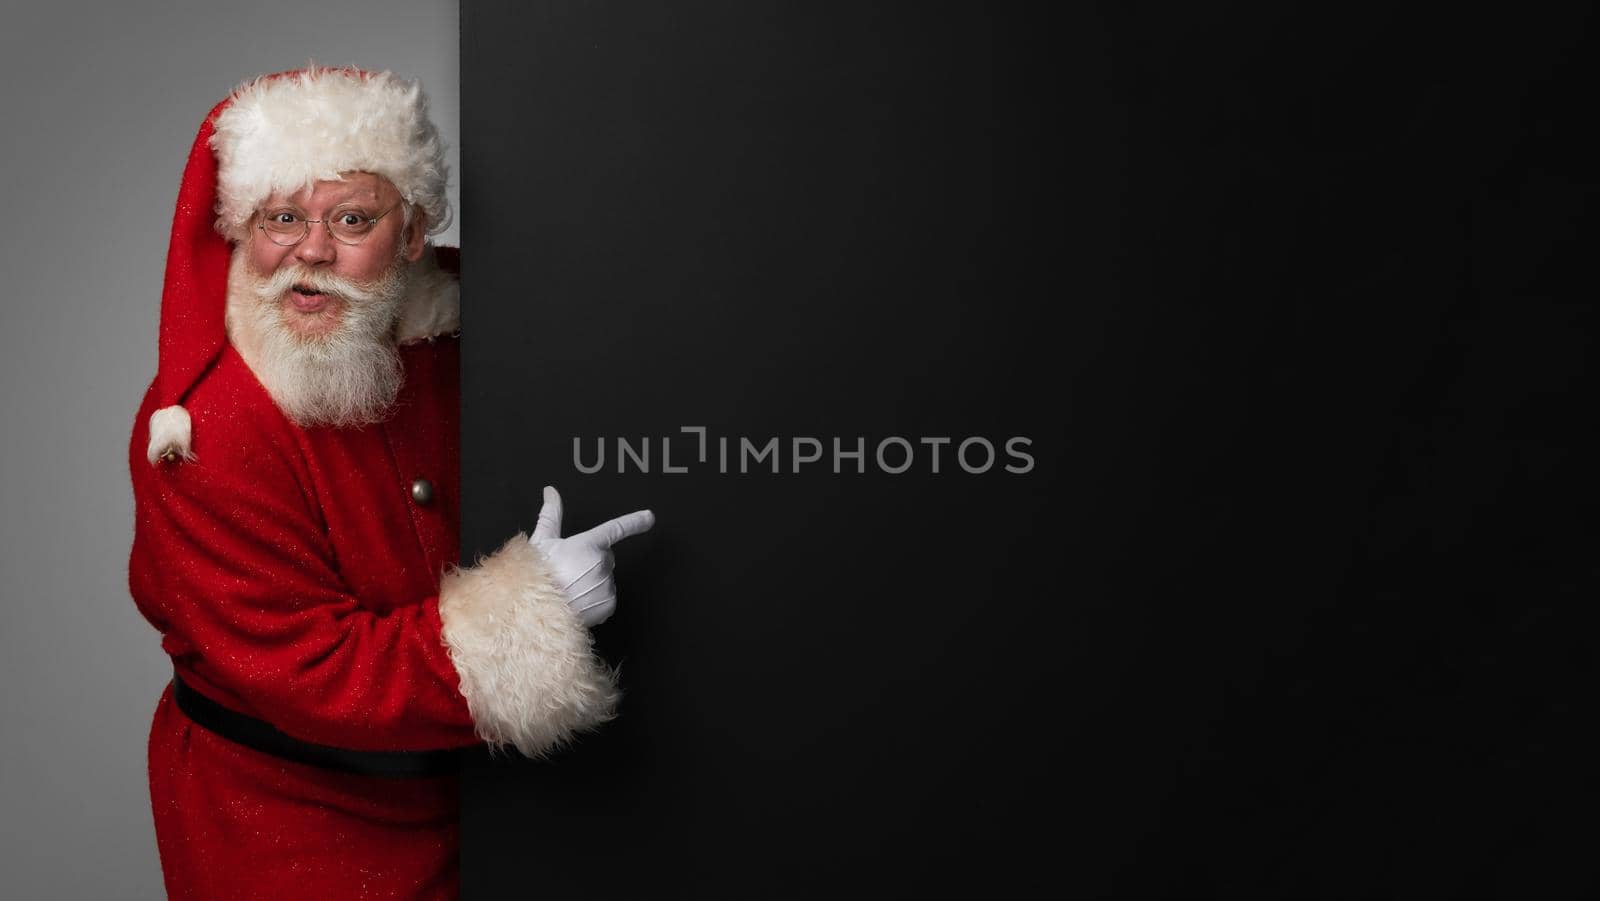 Santa Claus pointing at black paper billboard with copy space for text